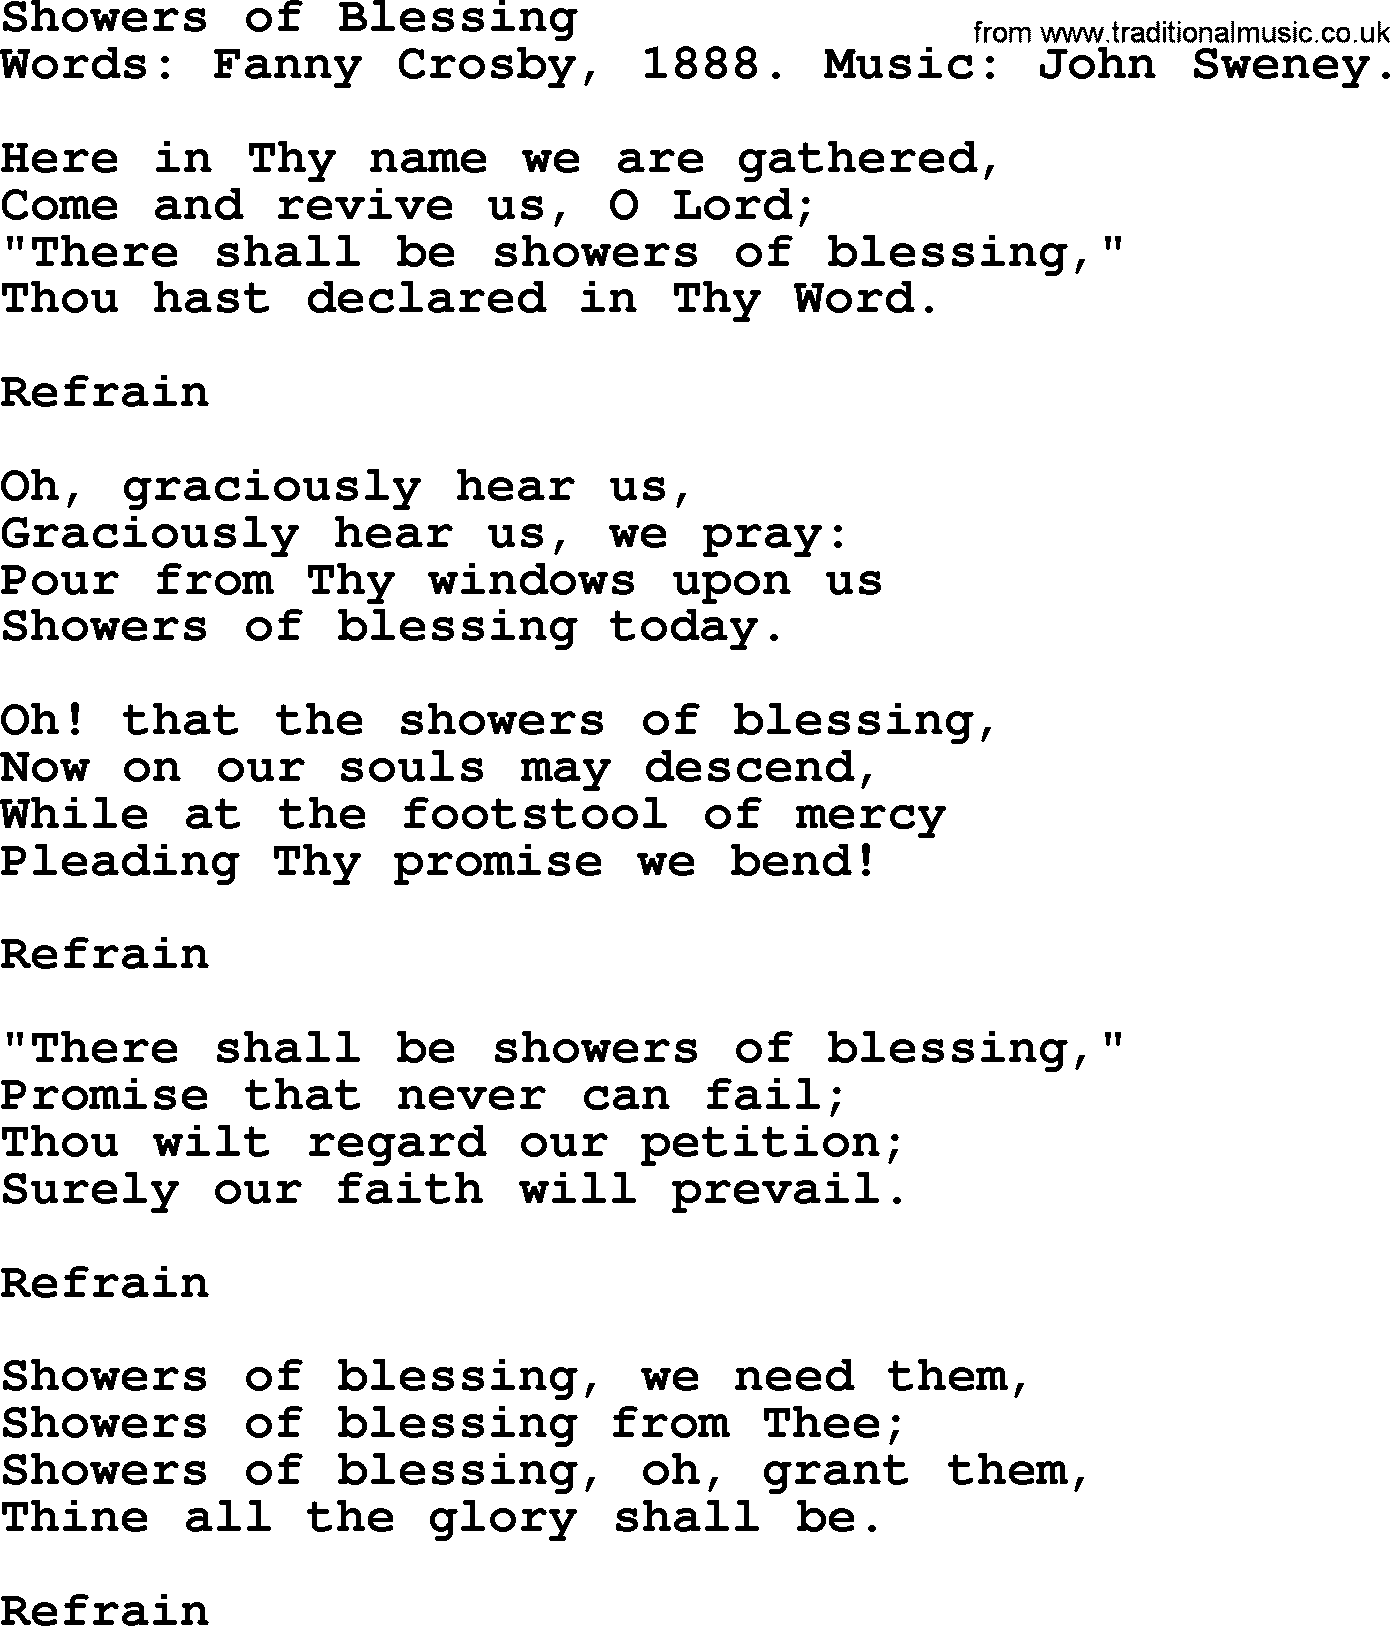 Fanny Crosby song: Showers Of Blessing, lyrics